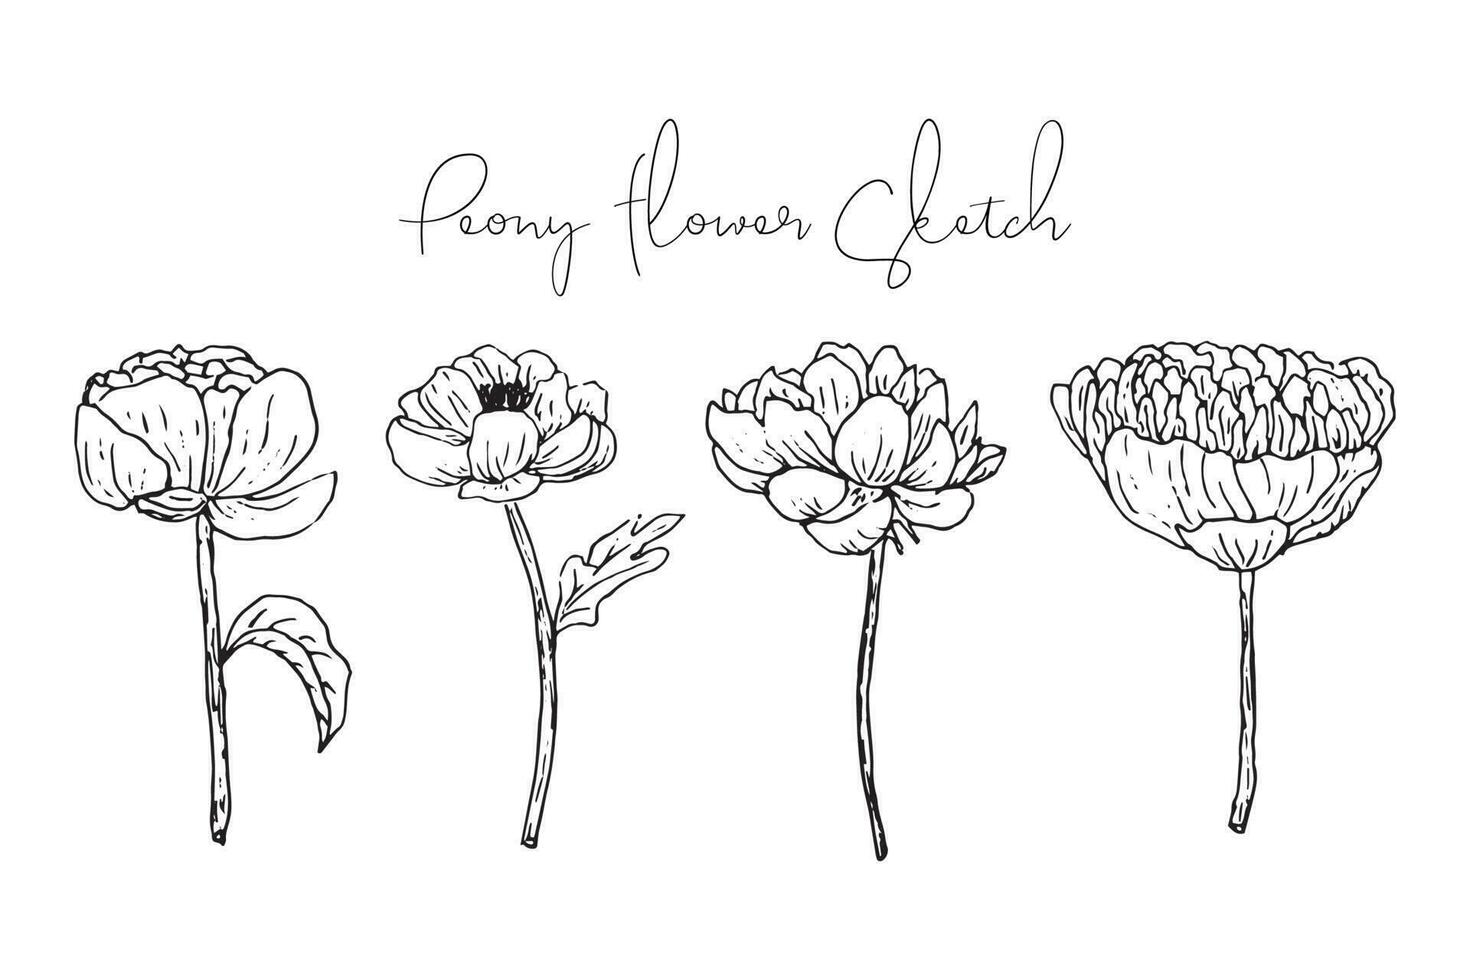 Aesthetic Spring Flower Sketch Collection vector